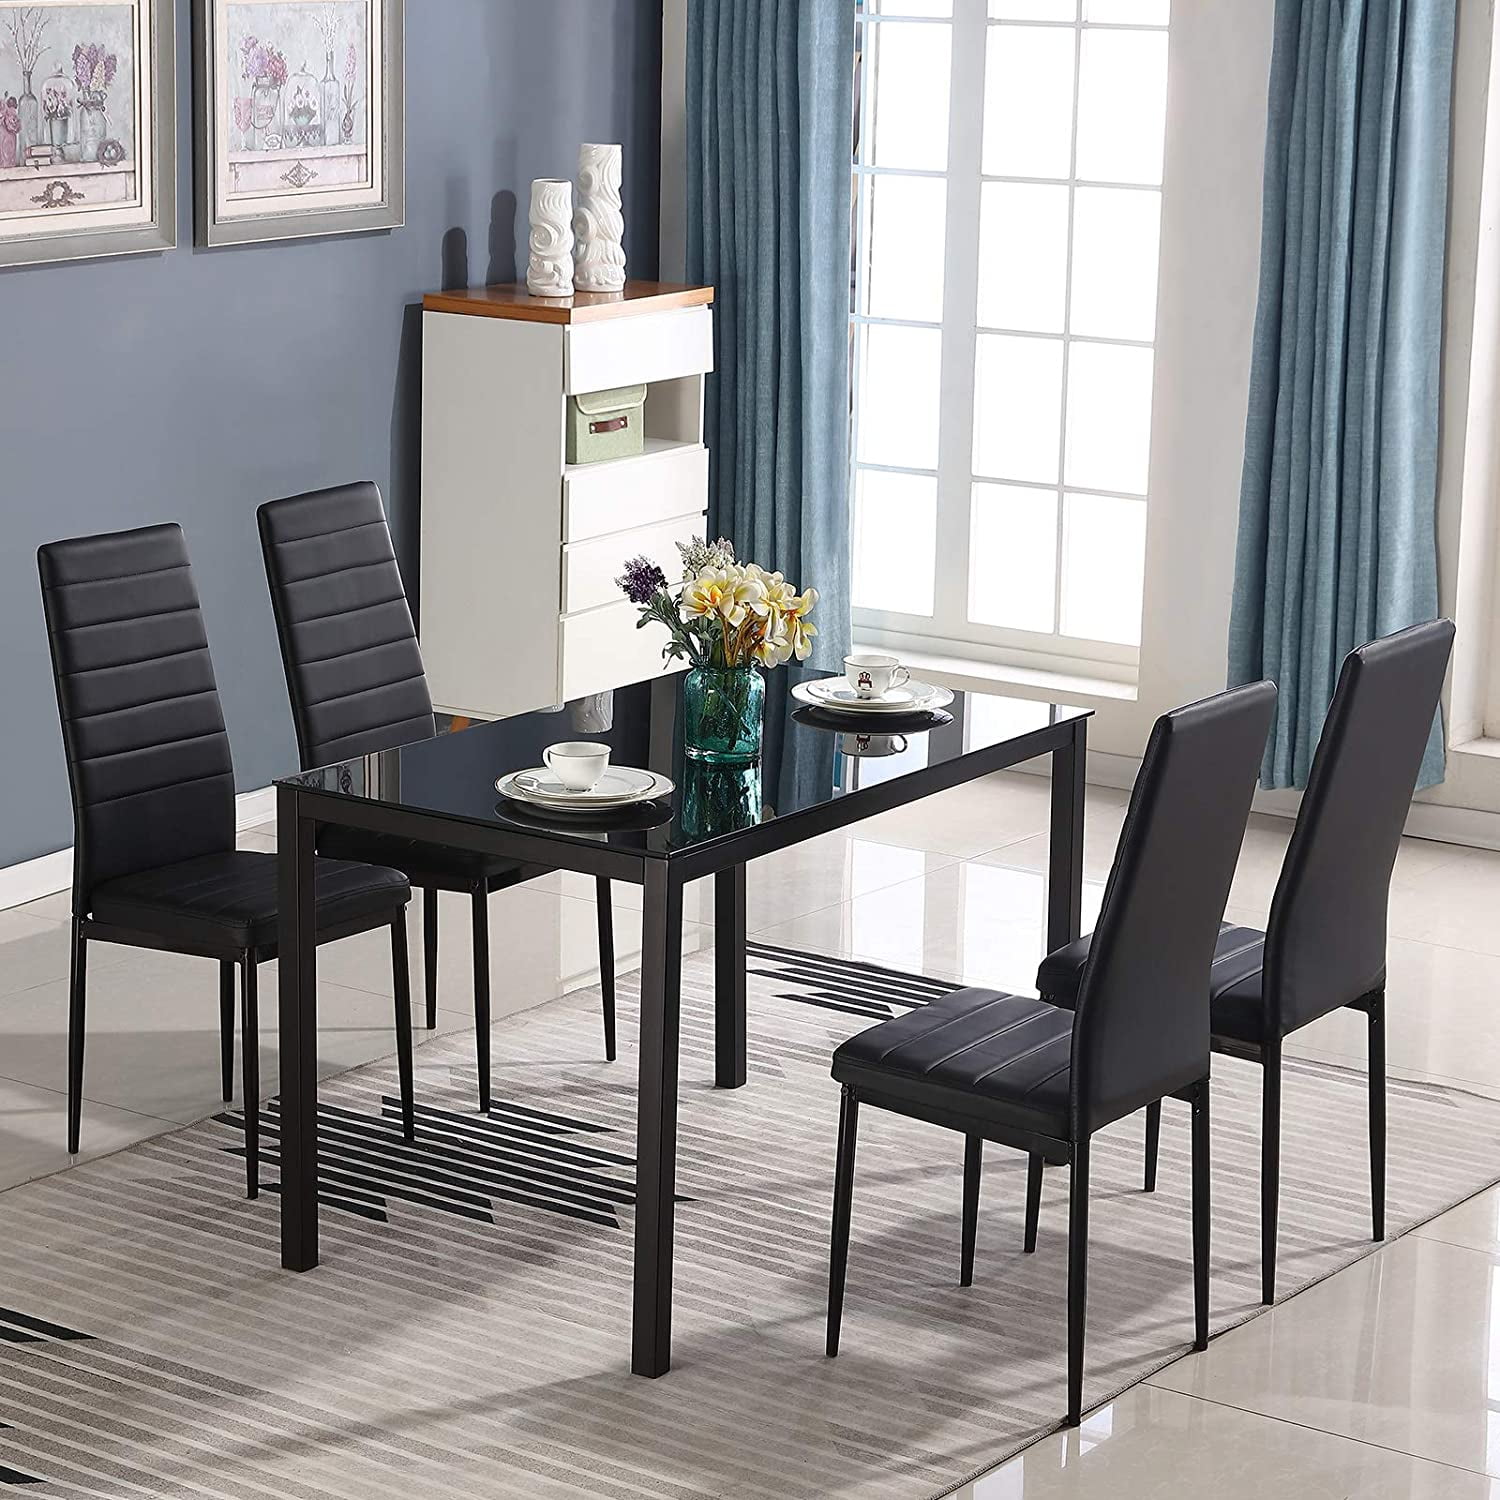 Dining Table Set for 4, Glass Top Dining Table with 4 PU Leather Chairs ...